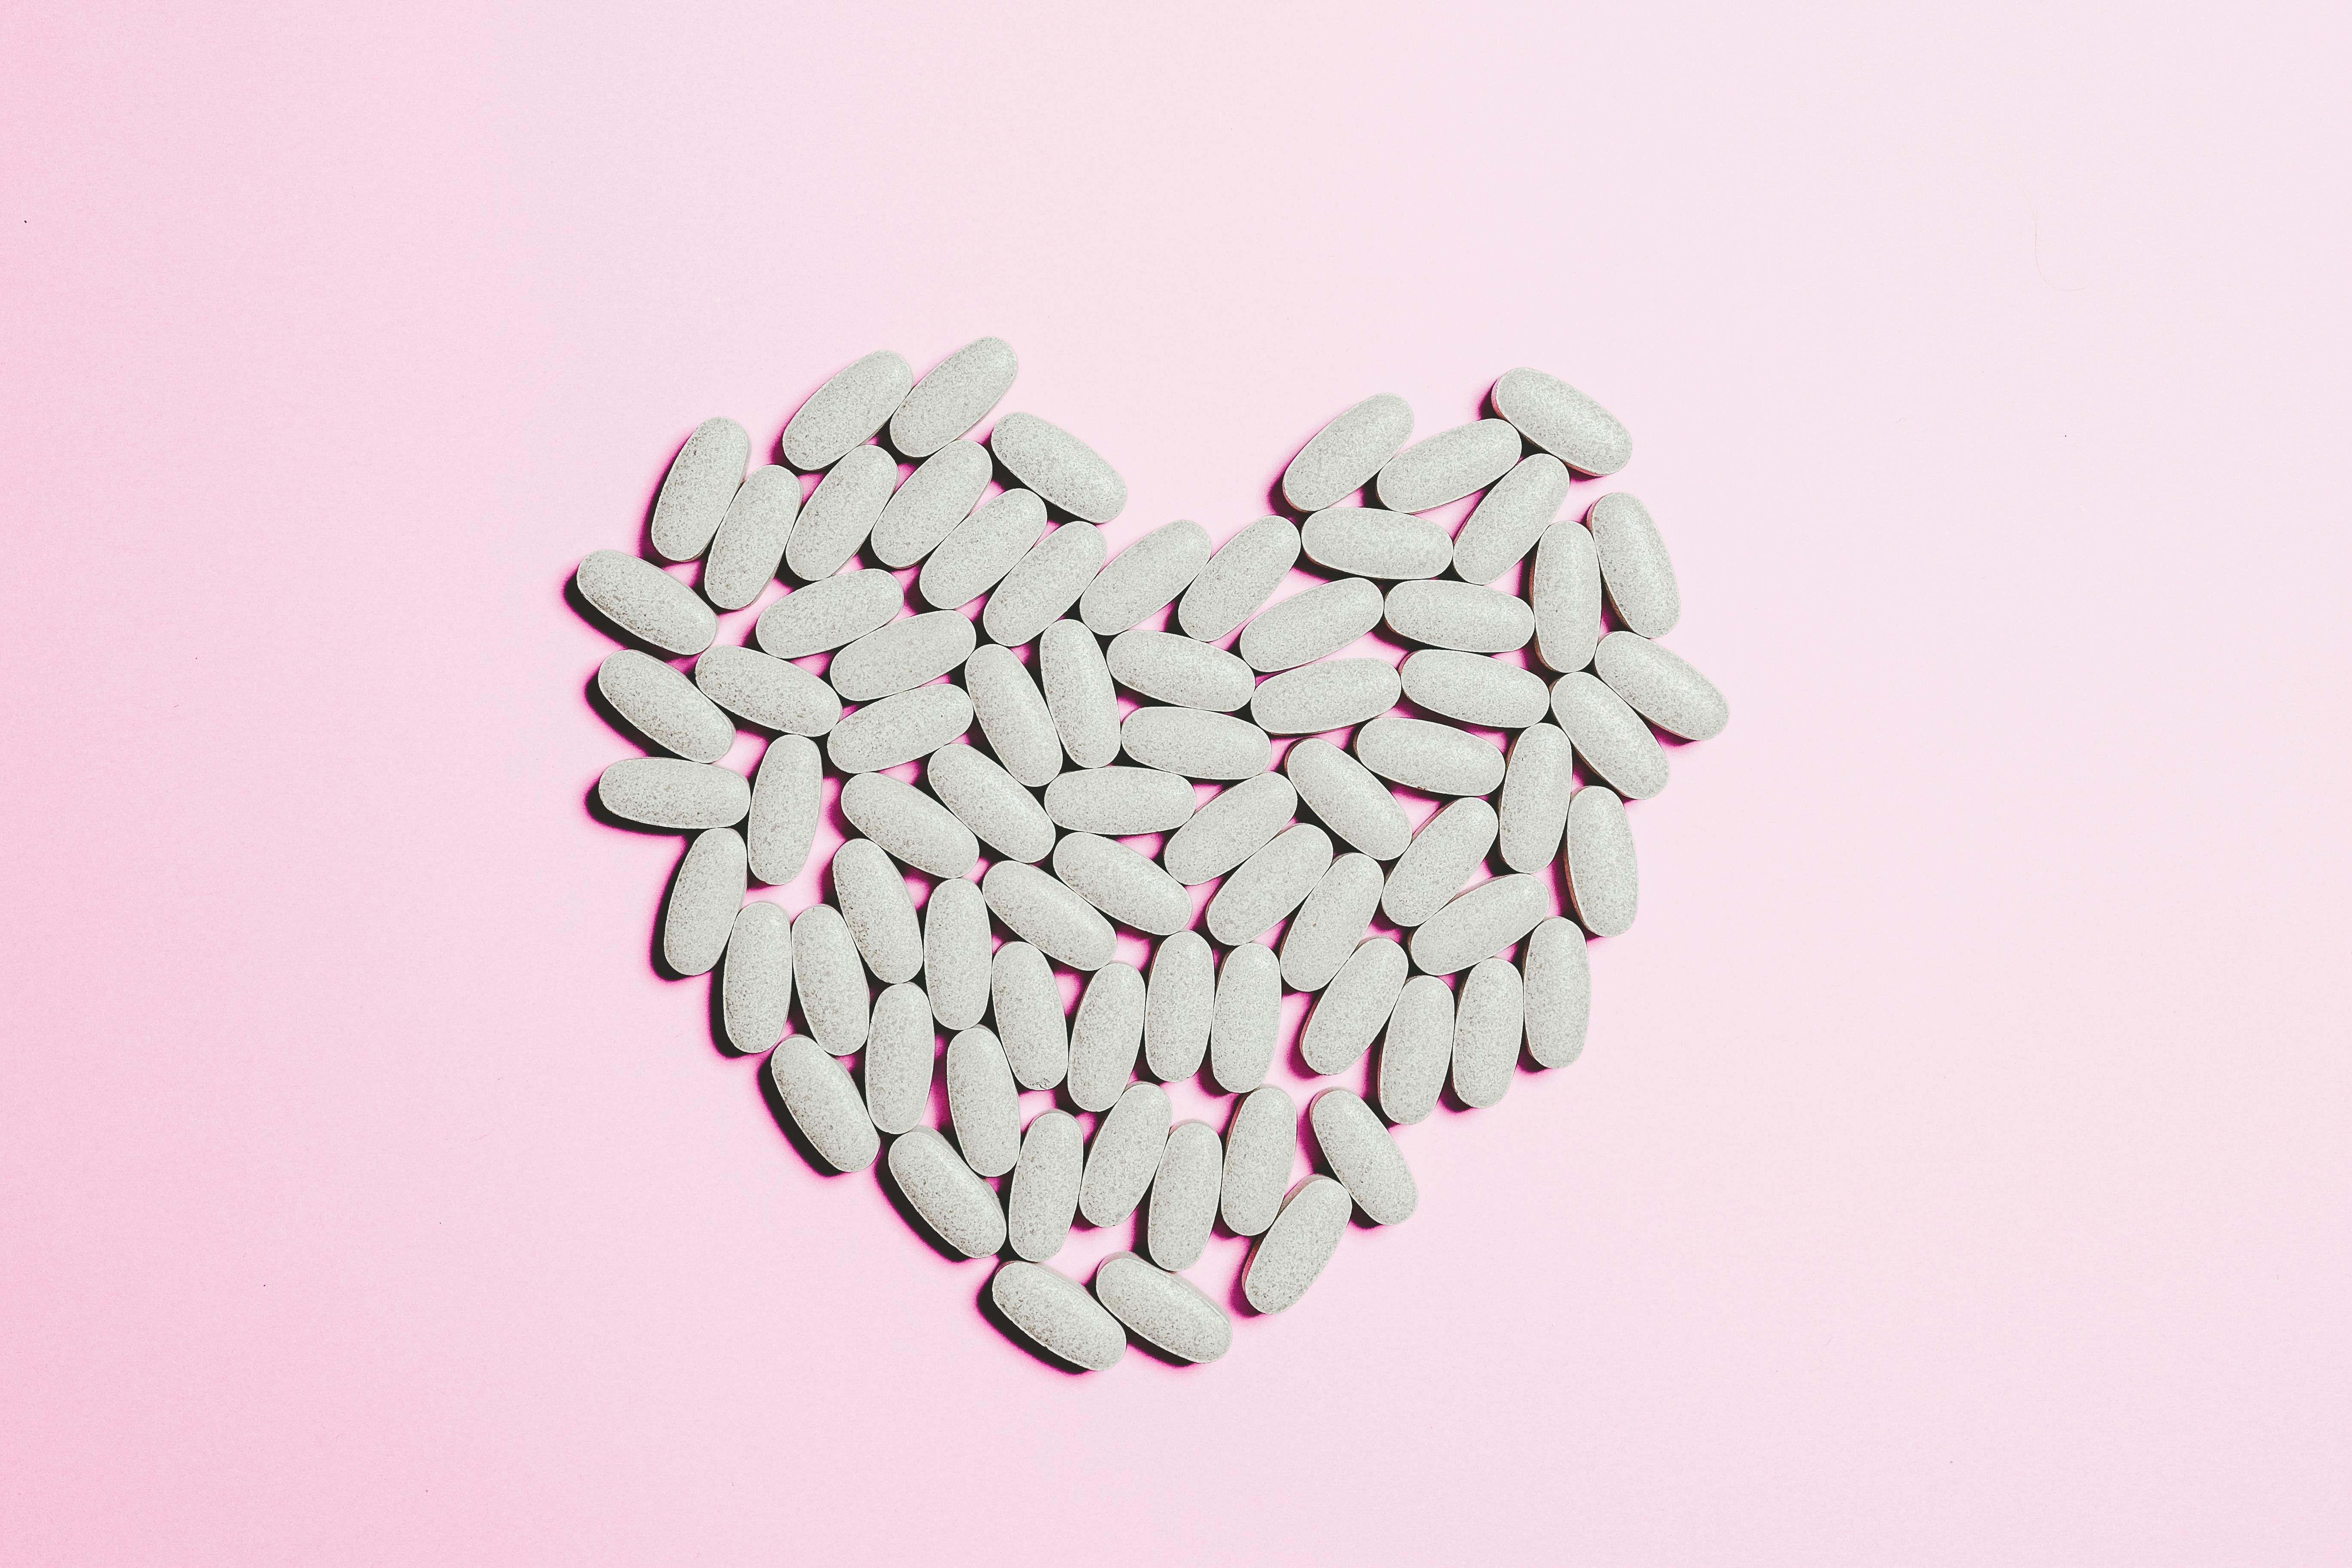 Woman creating a heart shape with supplement pills for women's health